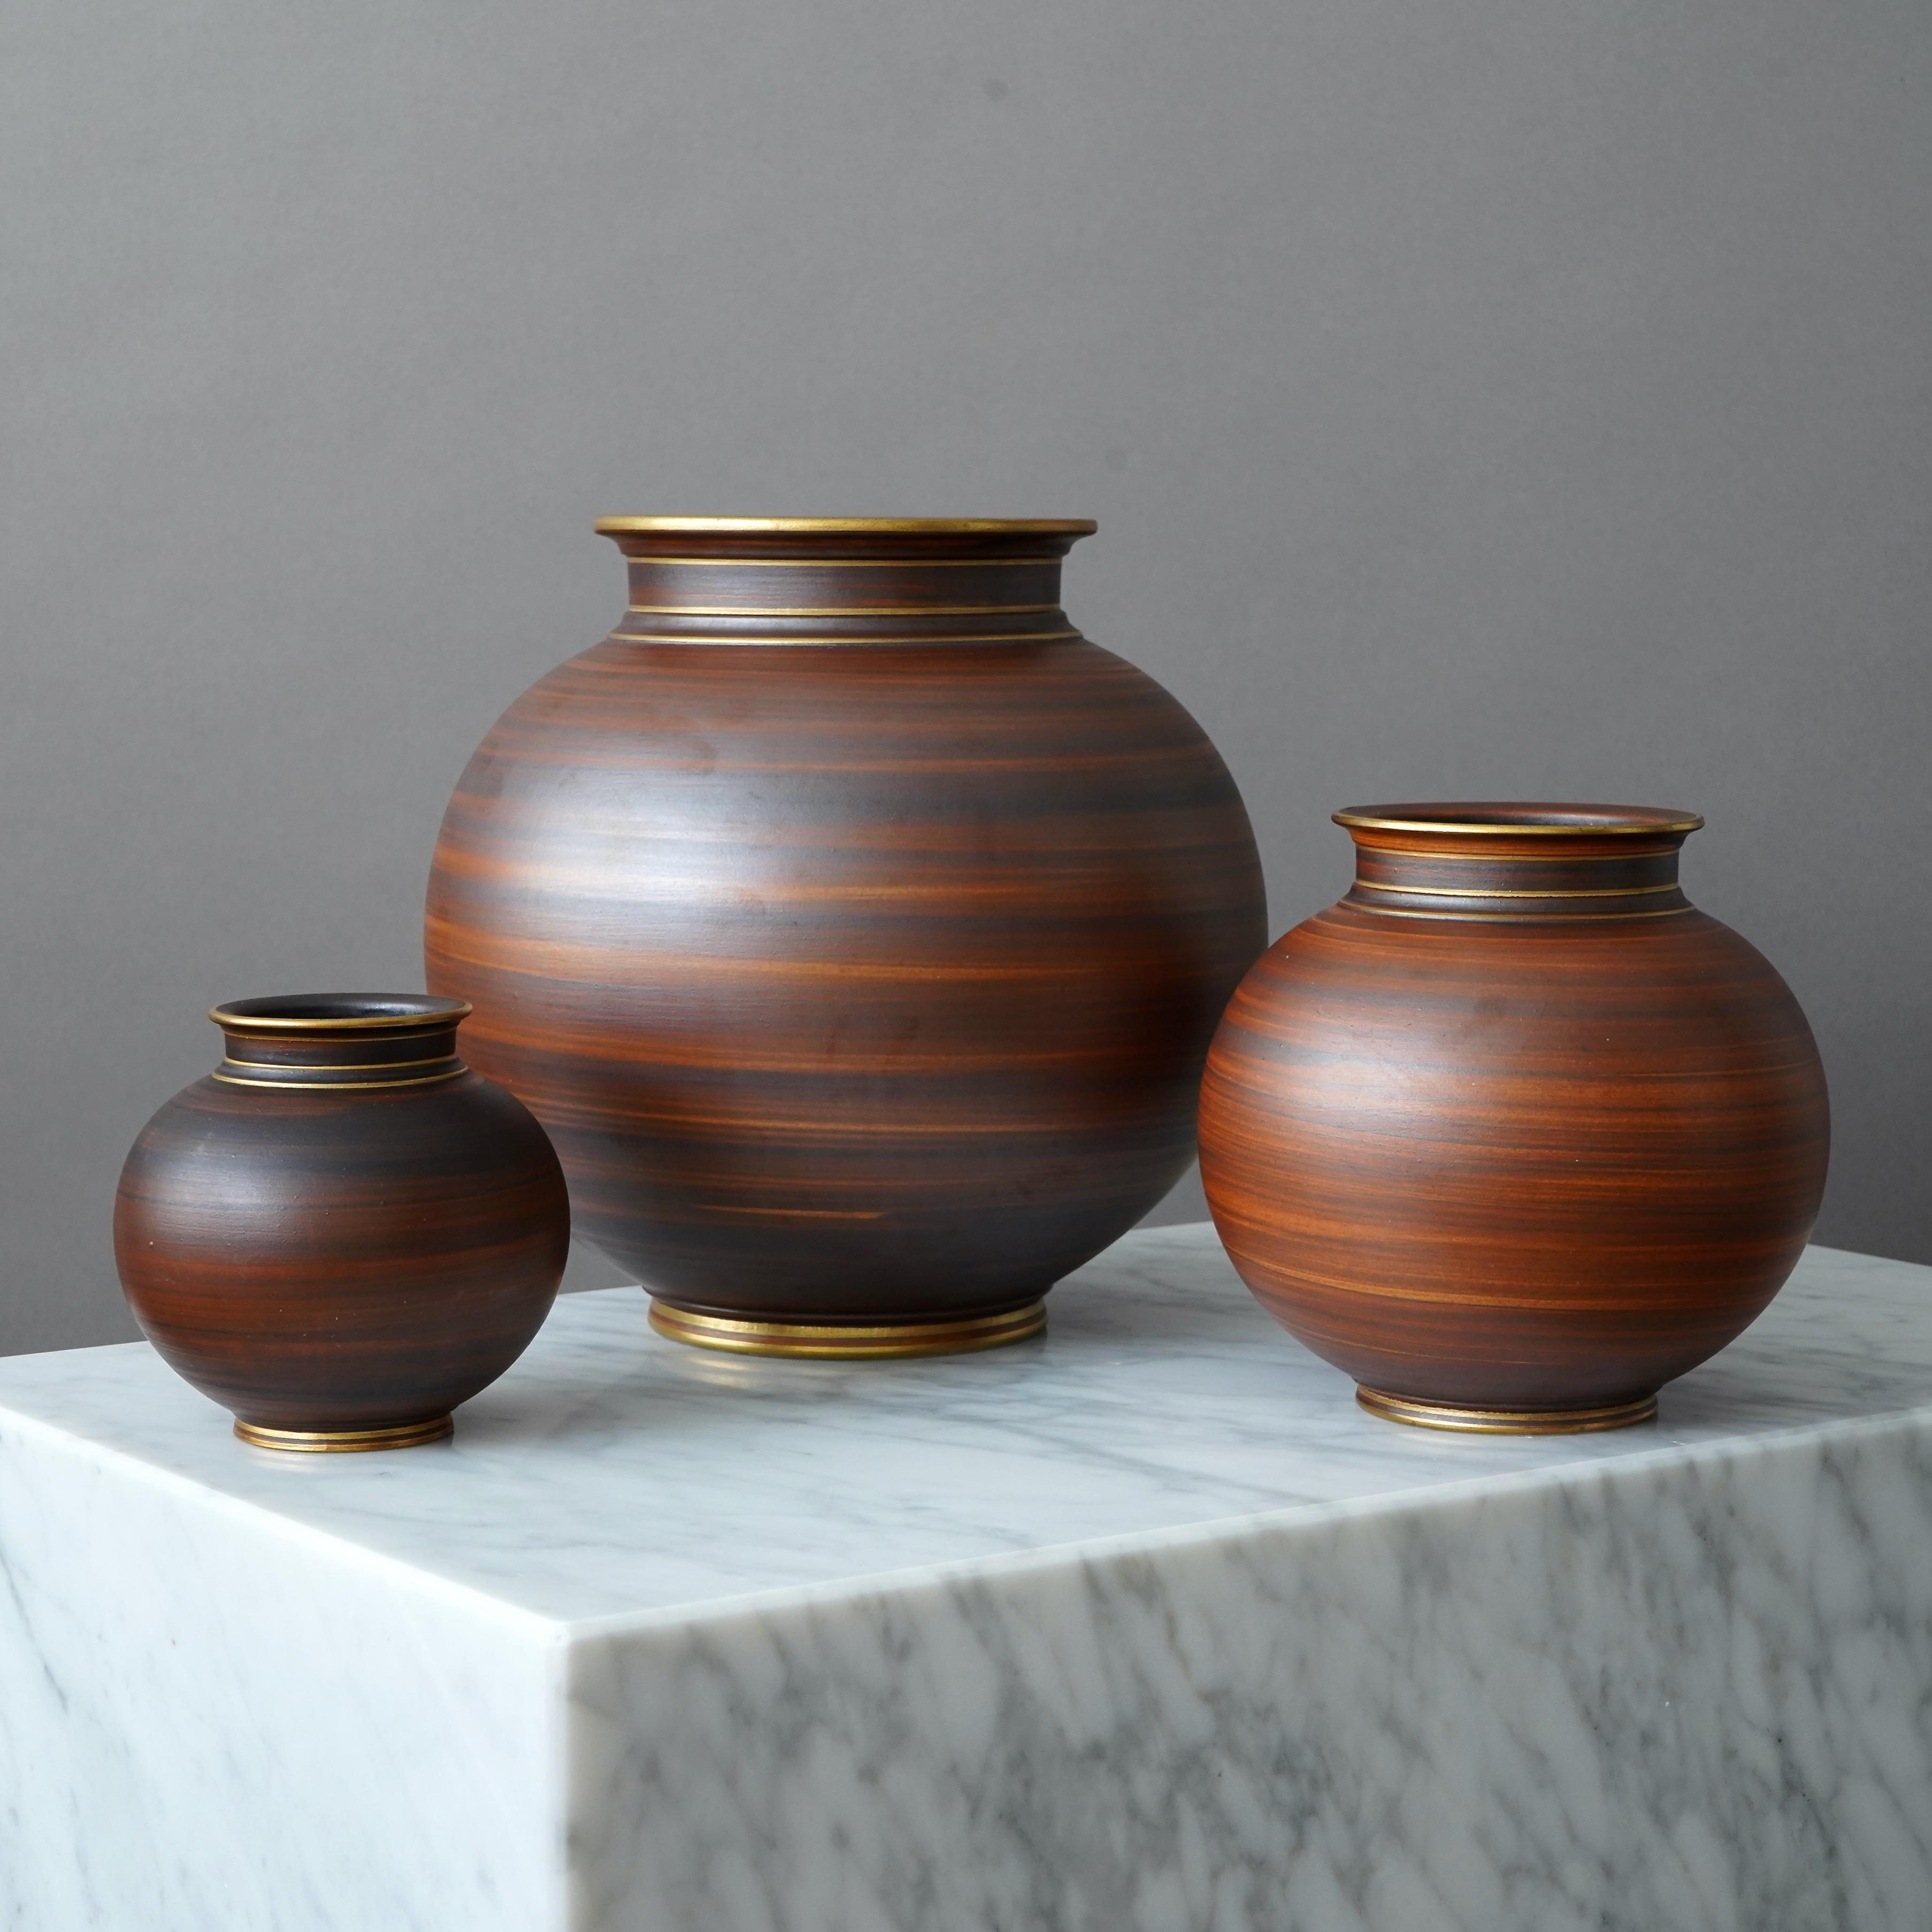 20th Century Set of 3 Art Deco Stoneware Vases by Gunnar Nylund for ALP, Sweden, 1930s